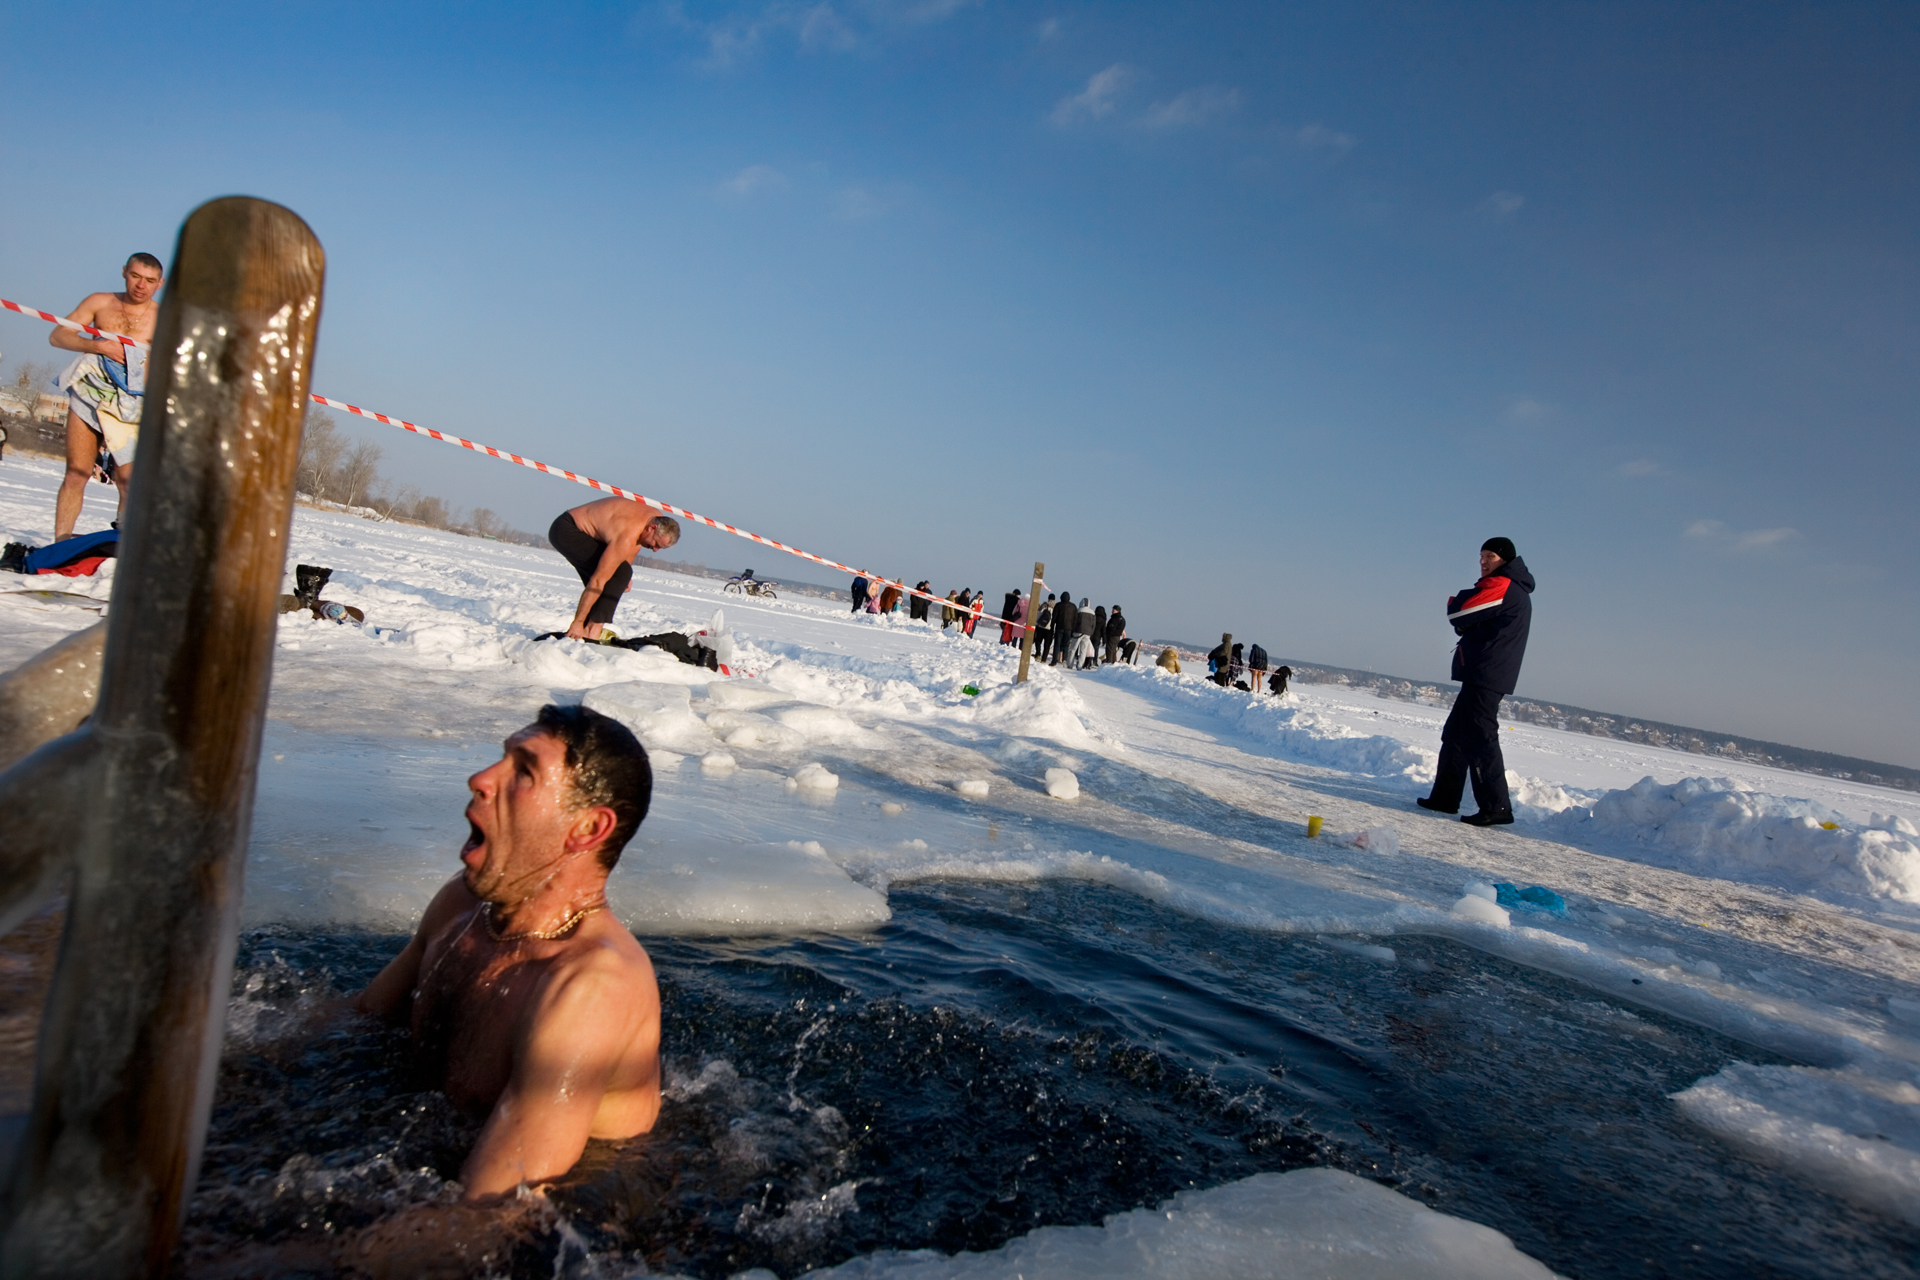  Pious in the extreme, a parishioner gasps after plunging into a cross-shaped hole cut into Lake Shartash at Epiphany.  Yekaterinburg, Russia  